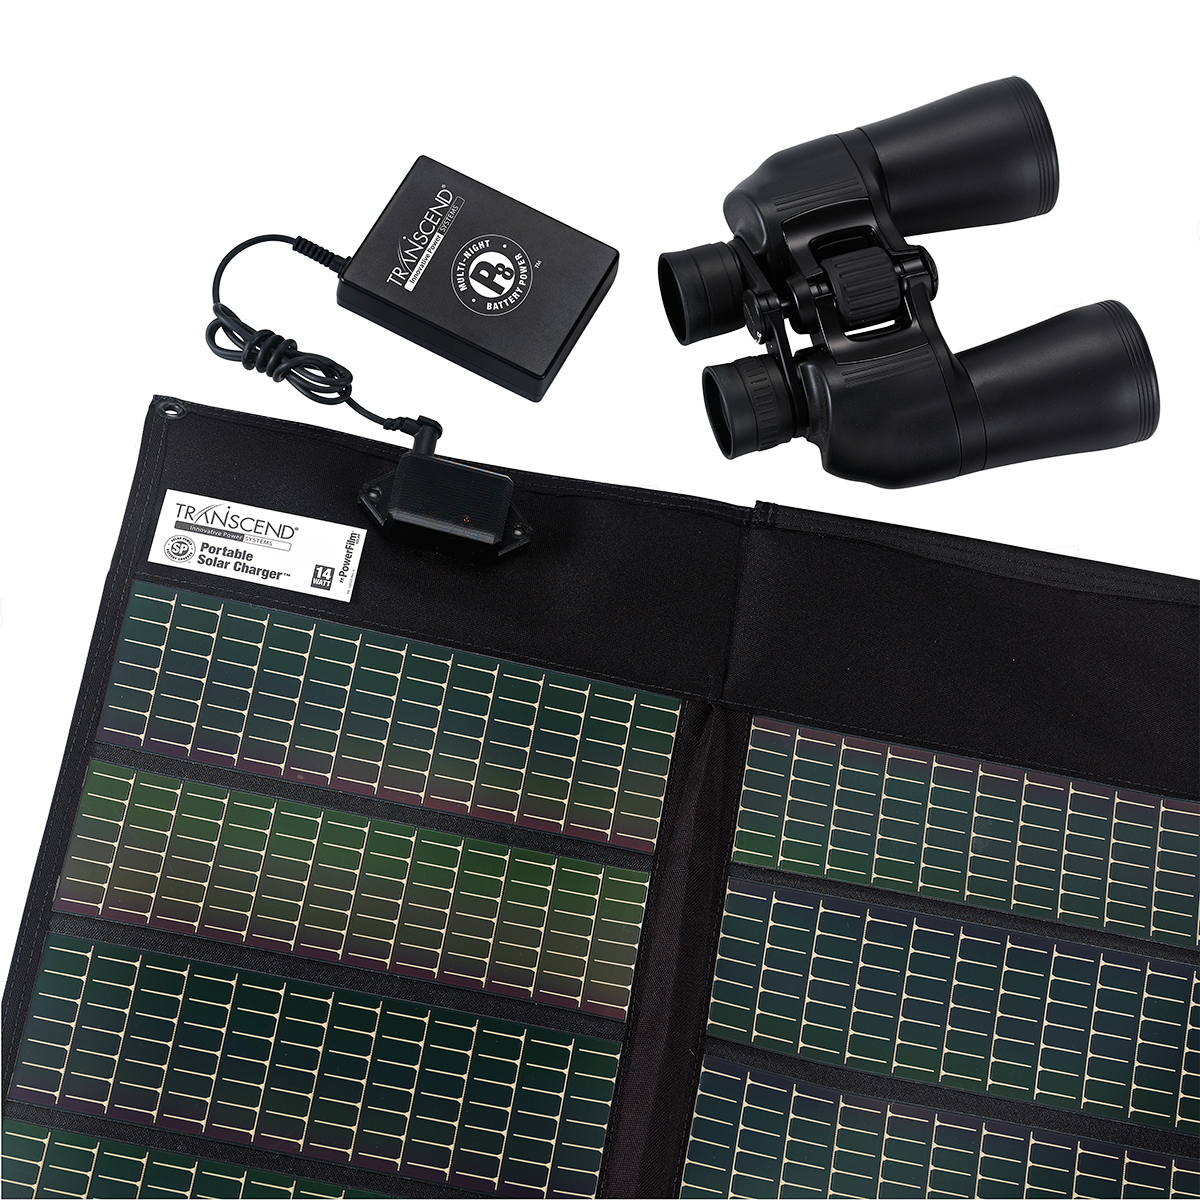 Transcend portable solar charger for travel cpap opens